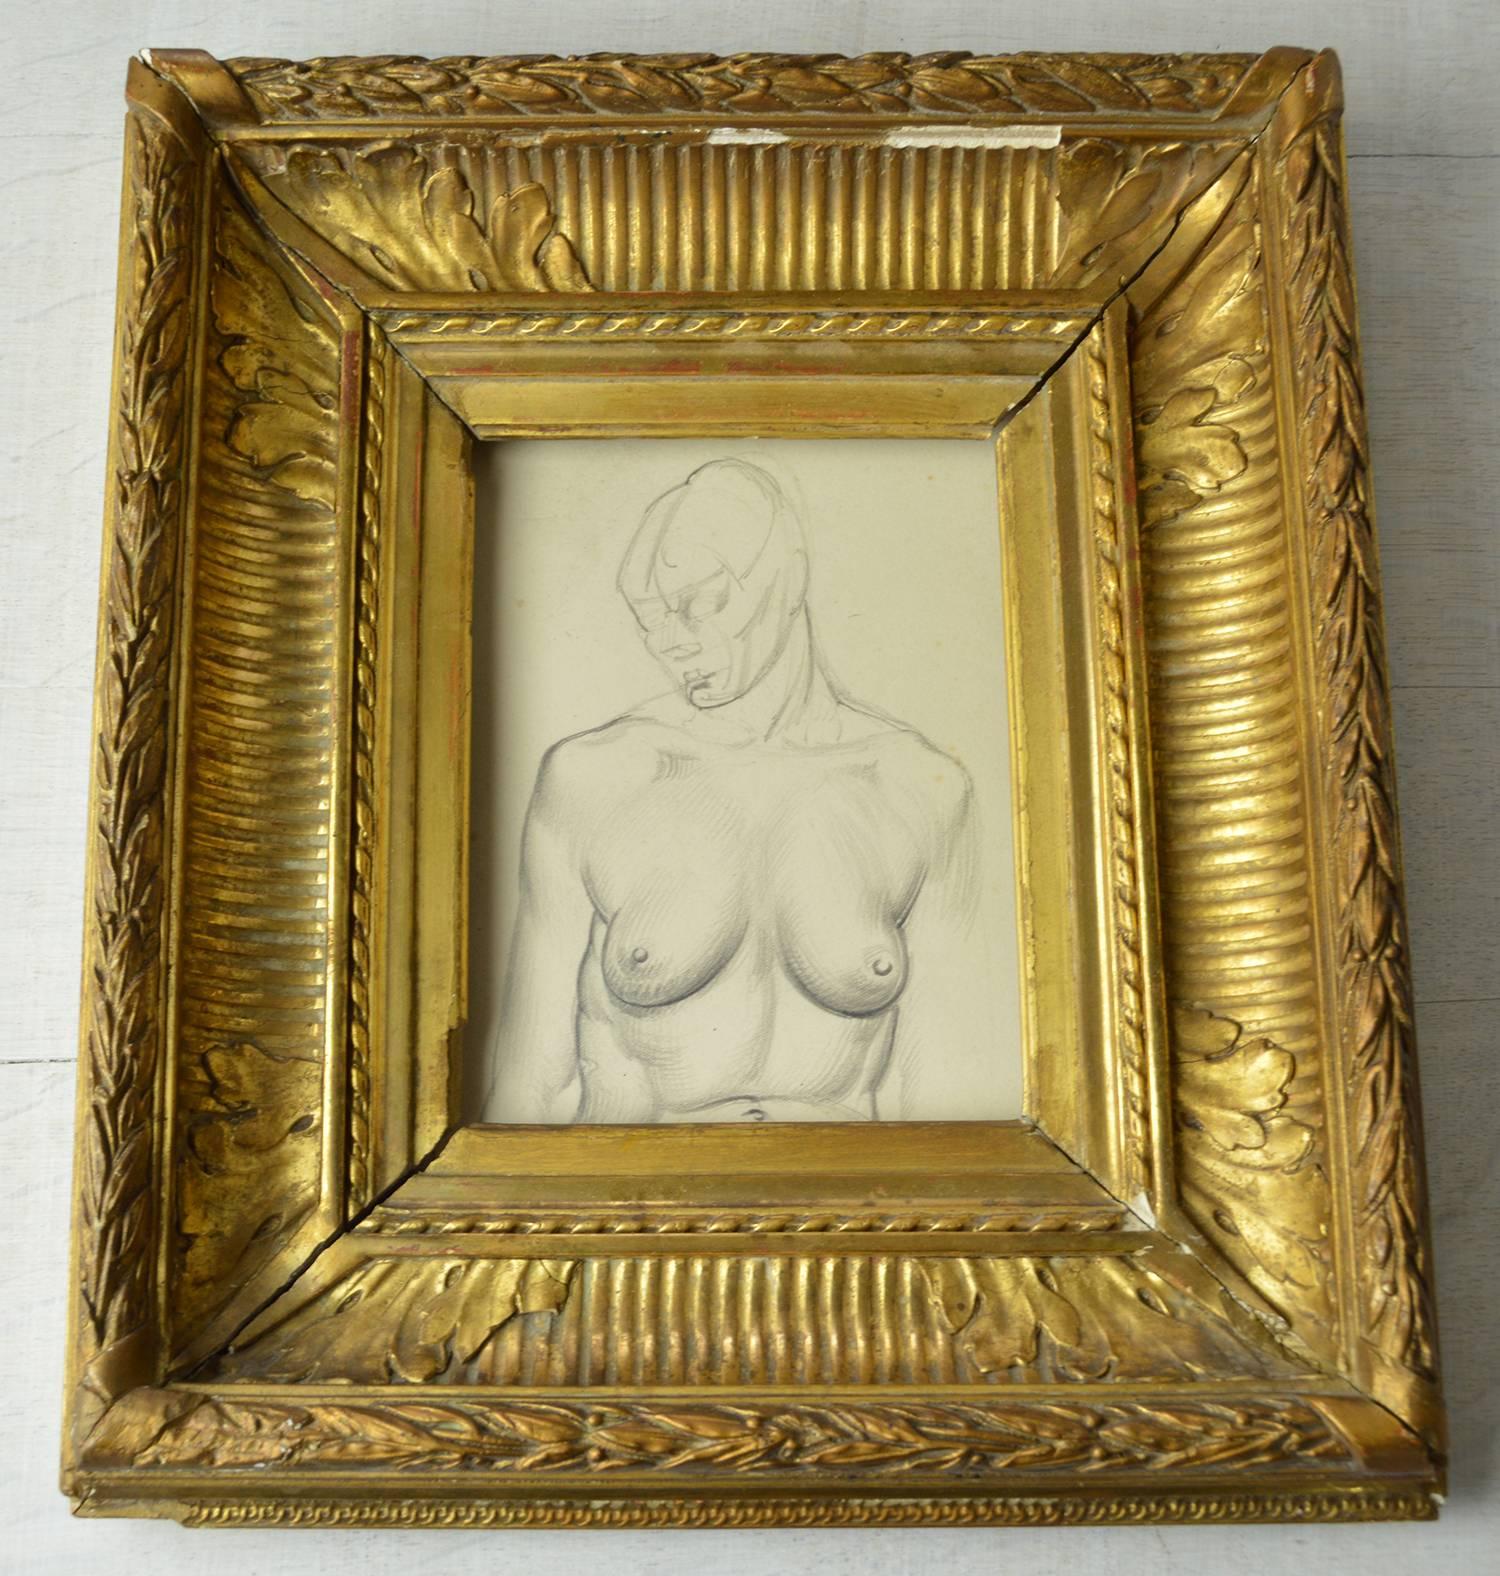 Wonderful pencil drawing of a female nude.

On paper. Unsigned.

Presented in an antique gilt frame.

The actual paper is not perfect. It is creased in places, drawing pin holes in the corners and detached from the backing board in several